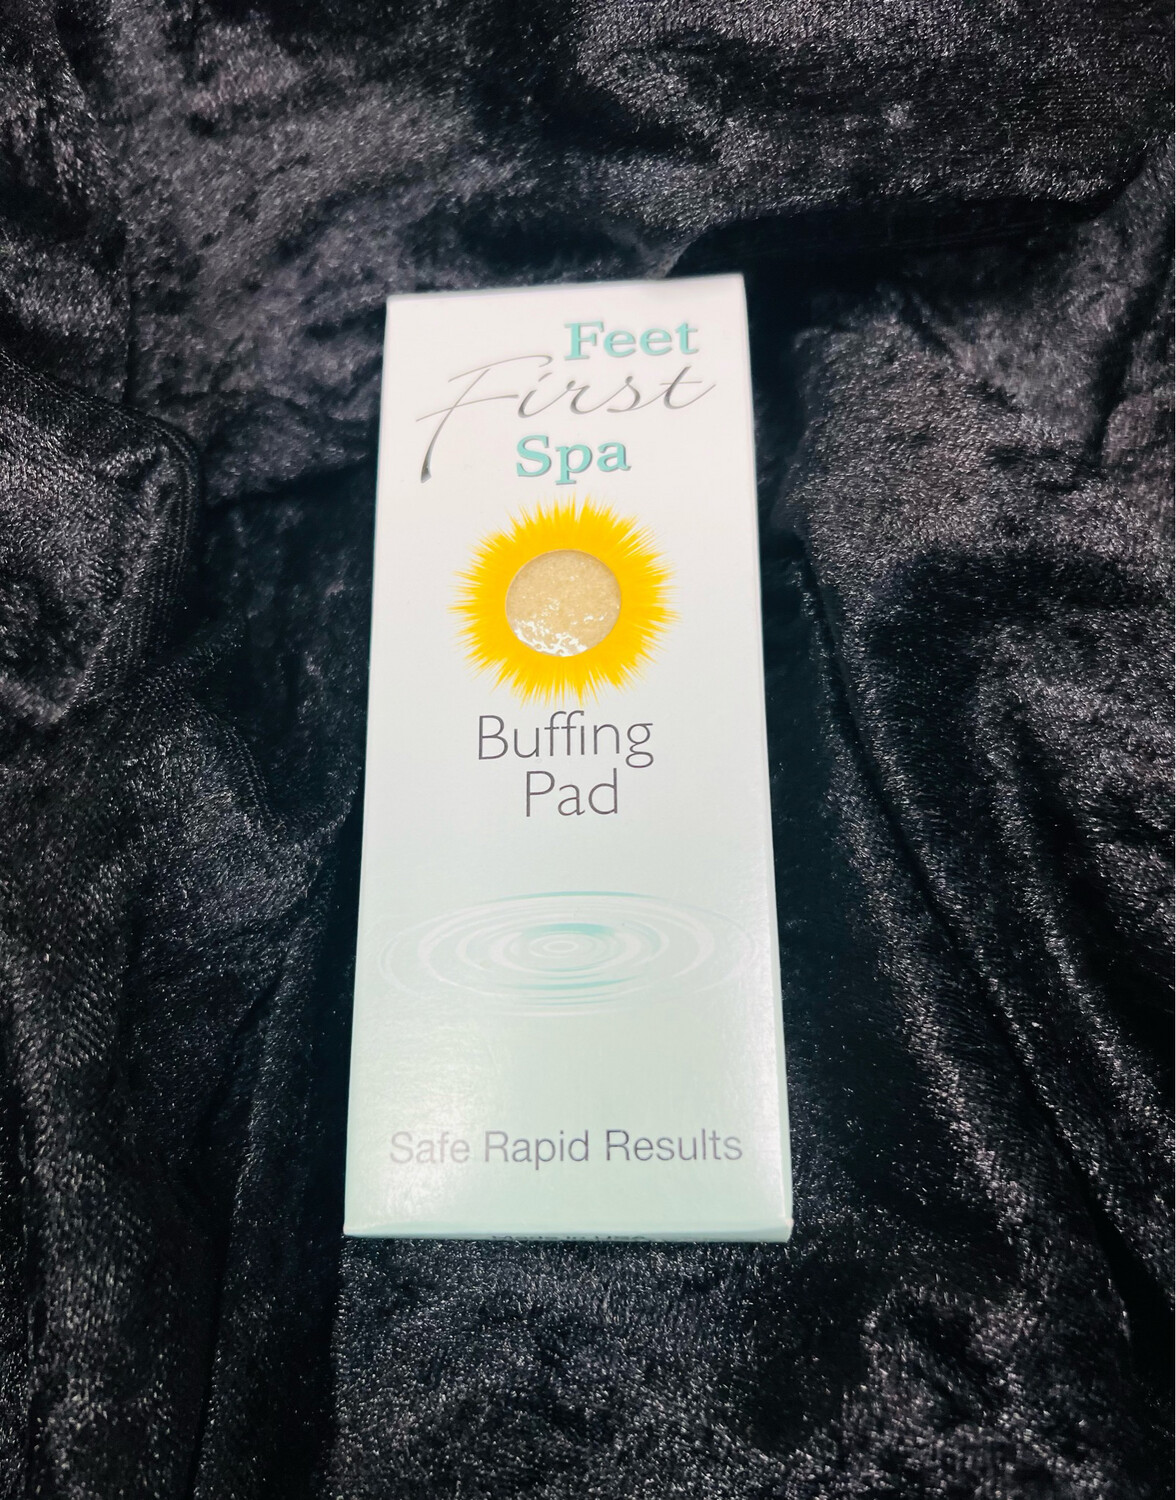 Feet First Spa Buffing Pad